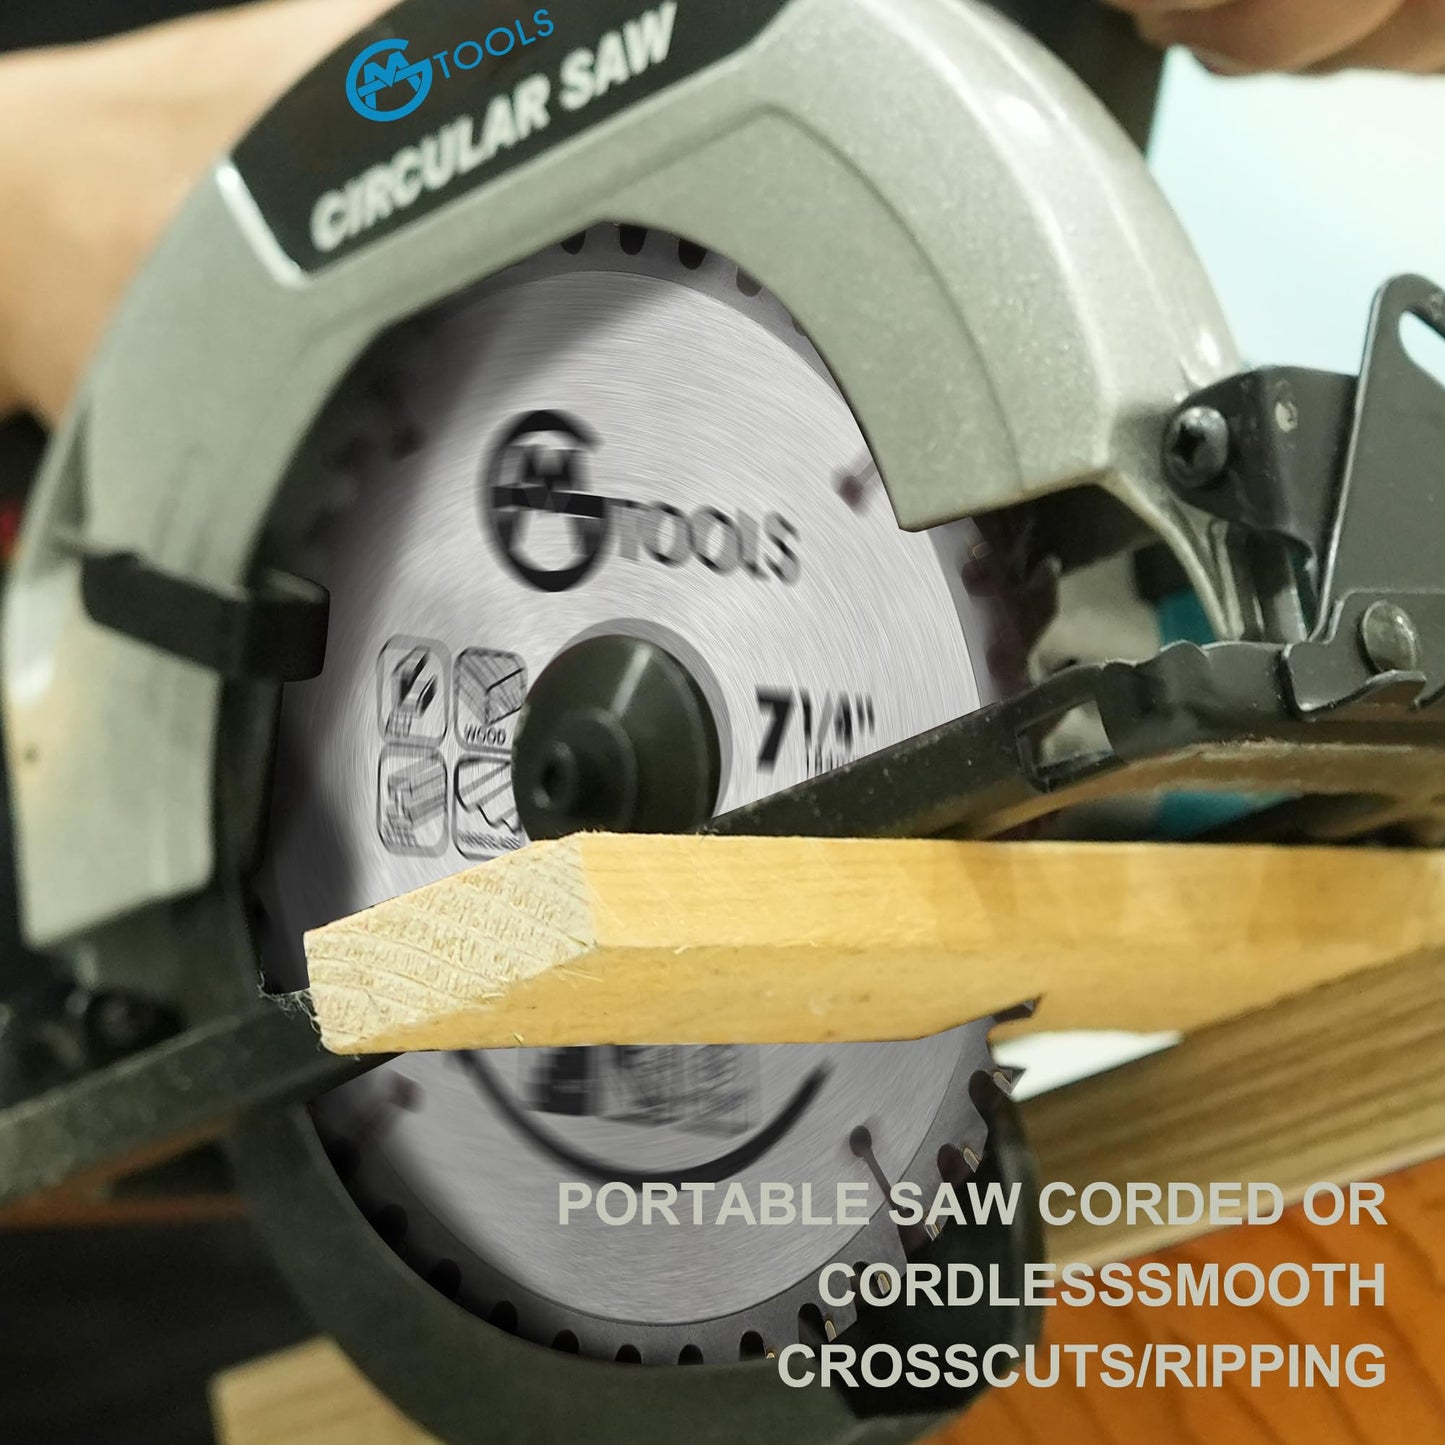 GMTOOLS 7-1/4 Inch 40 Teeth Carbide Tipped Circular Saw Blade with 5/8-Inch Arbor, Professional ATB Finishing Woodworking Saw Blade for Plywood,